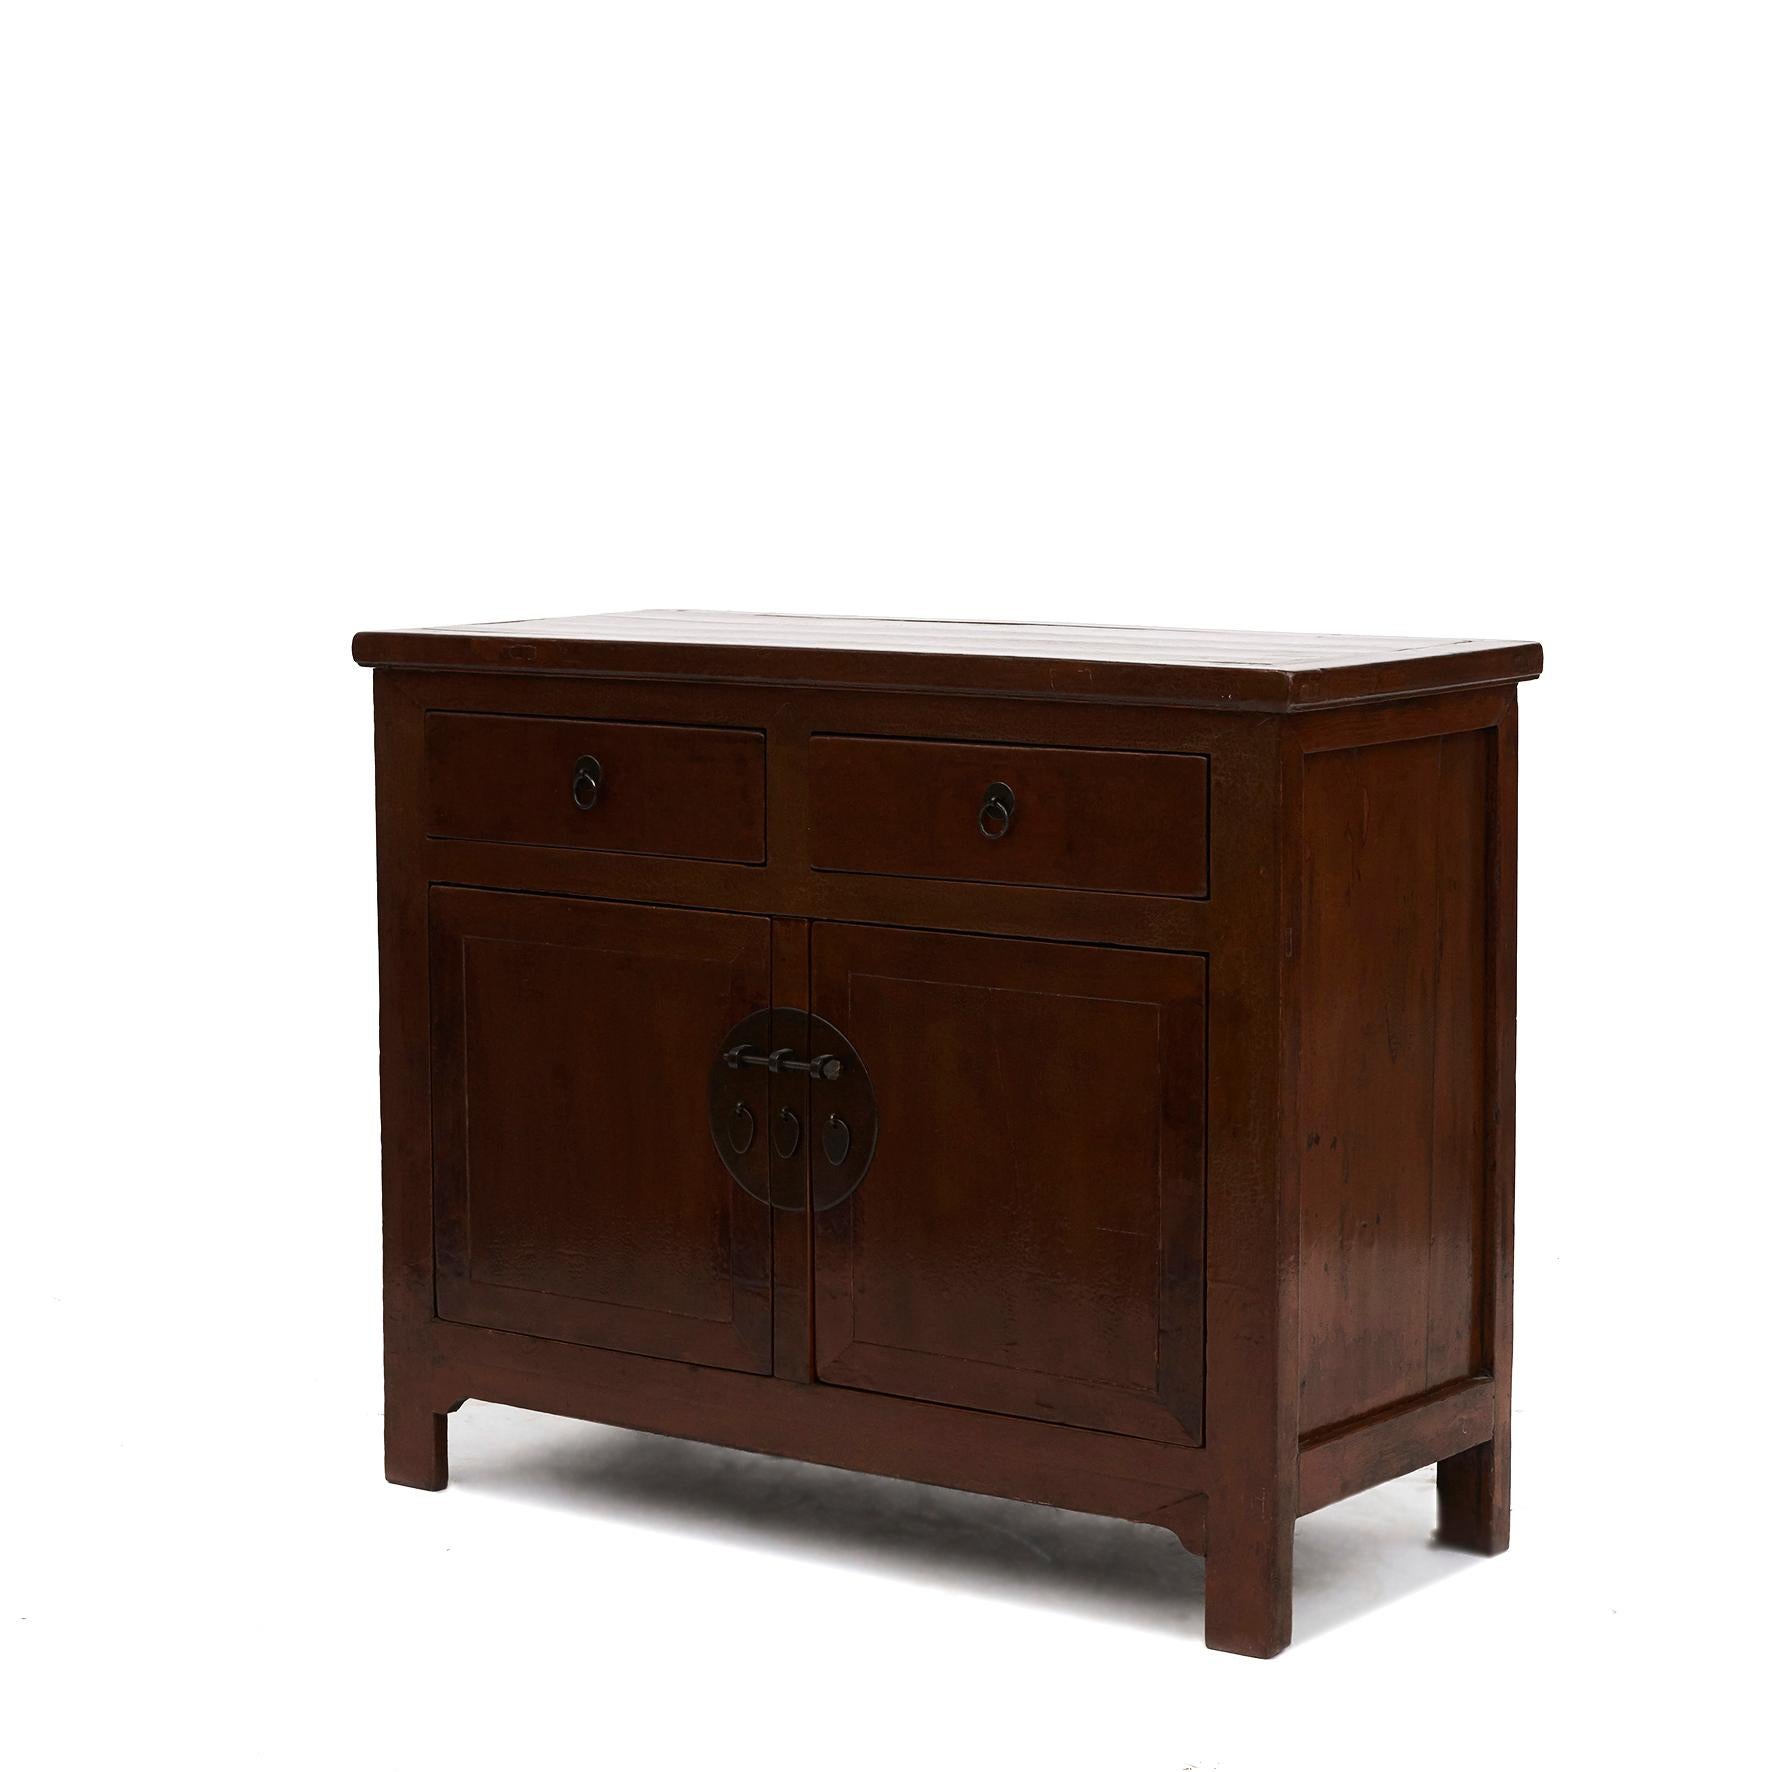 Sideboard in an original beautiful nut colored lacquer with a good patina.
Two drawers under which a pair doors with a central bar.

If needed the center bar can easily be removed to make it easy to place a wider item into the cabinet

From